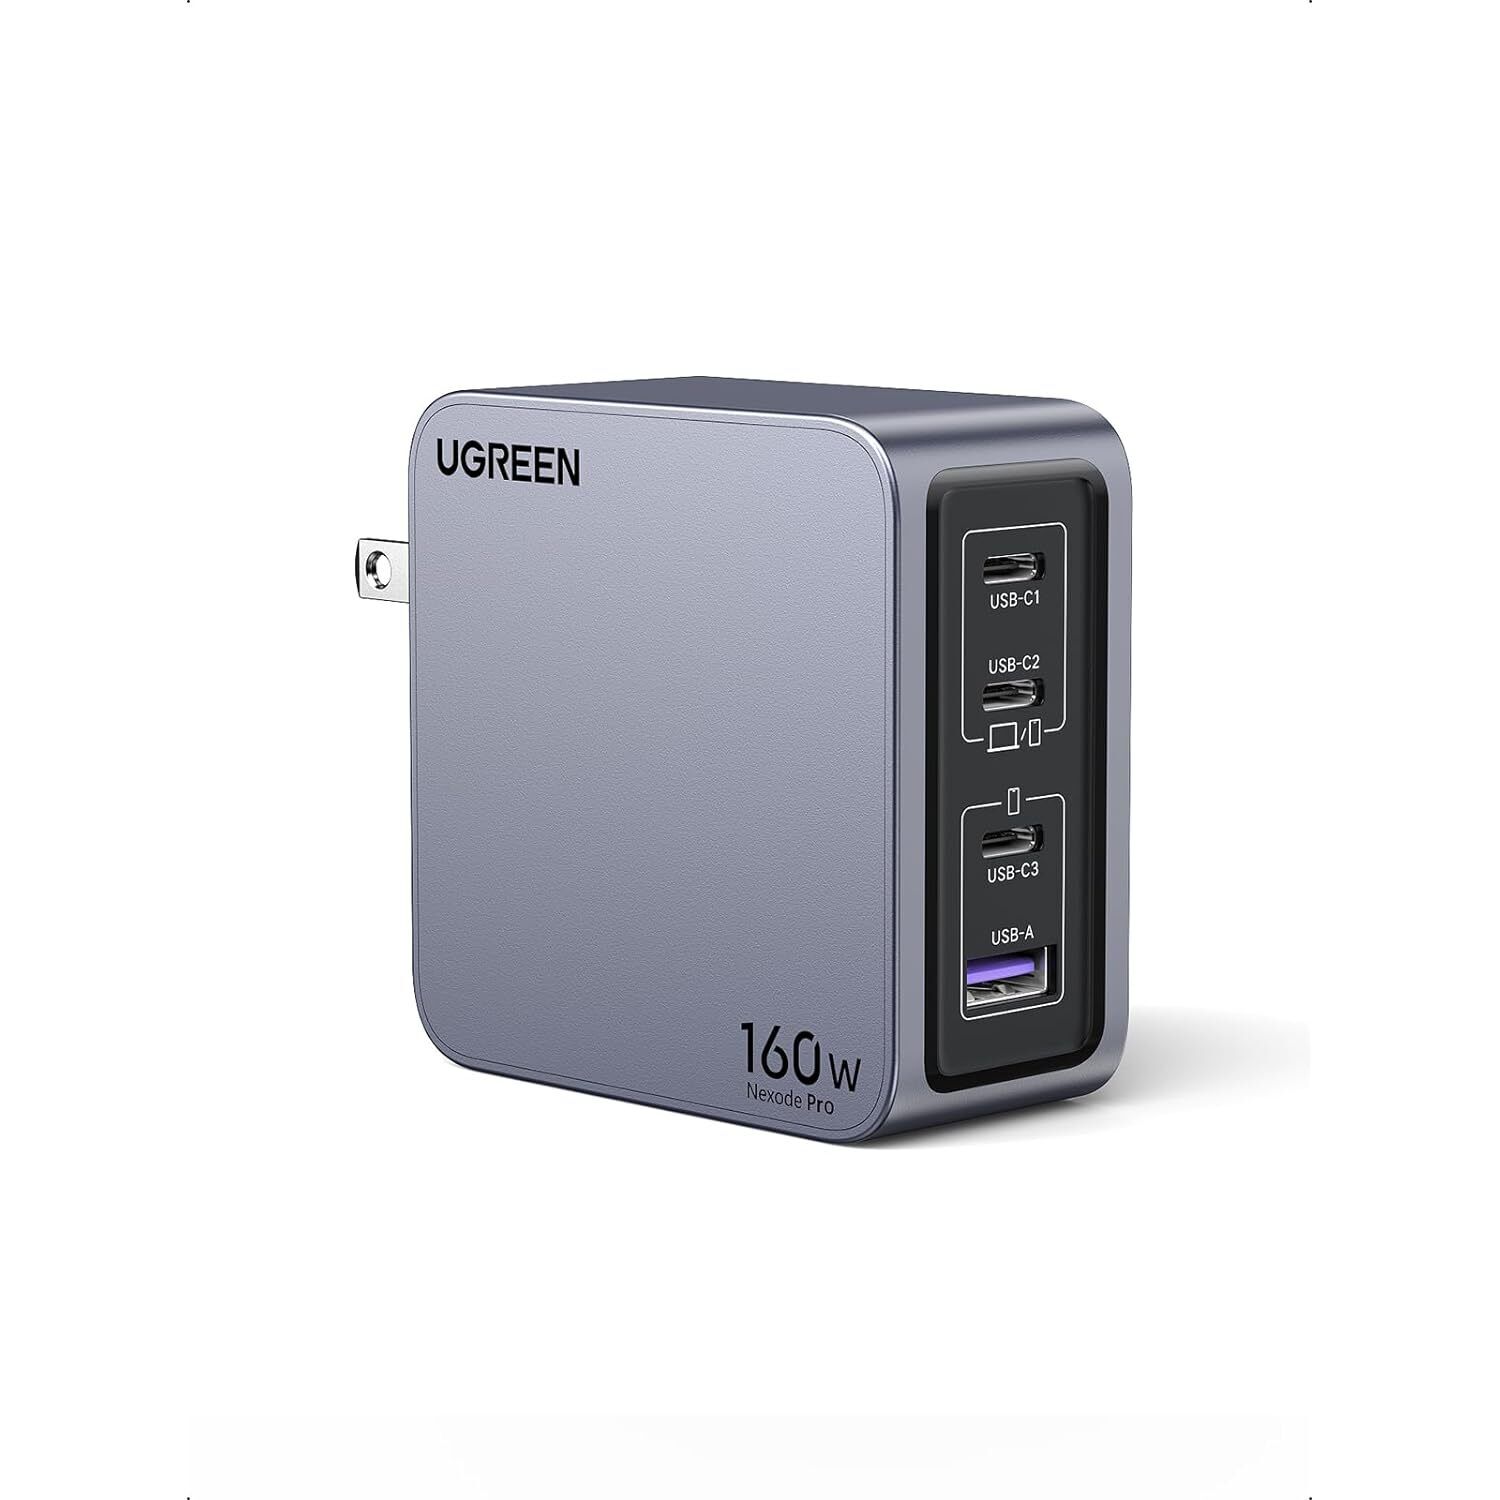 UGREEN Nexode Pro 160W USB C Charger, 4-Port PD 3.1 GaN Compact Fast PPS Wall